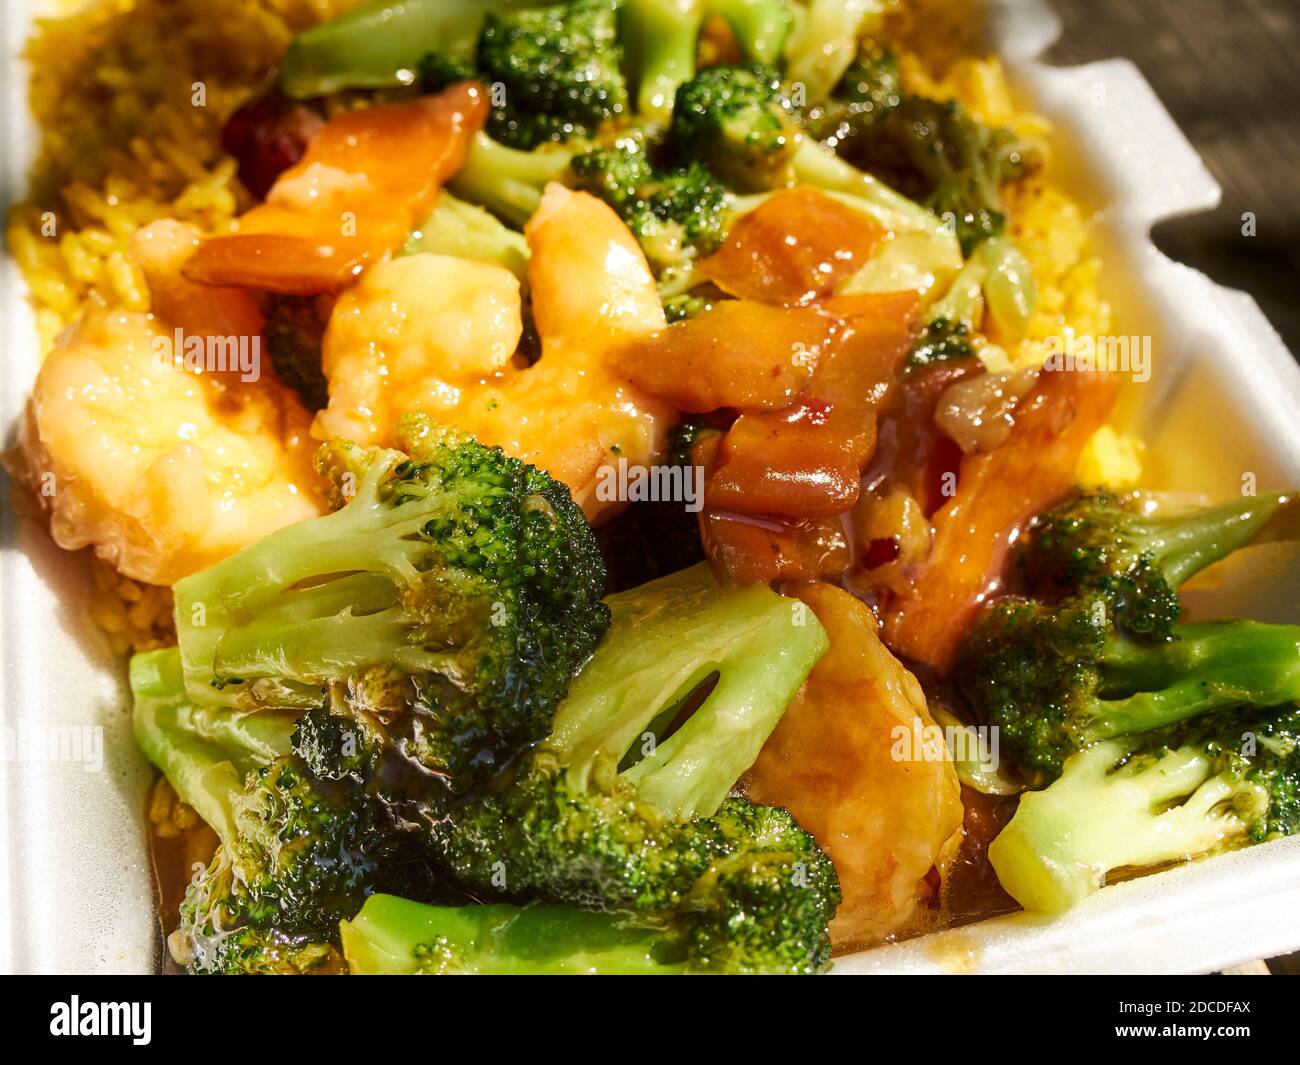 Shrimp with broccoli over fried rice - an iconic Chinese/American takeout dish in a plastic foam container Stock Photo